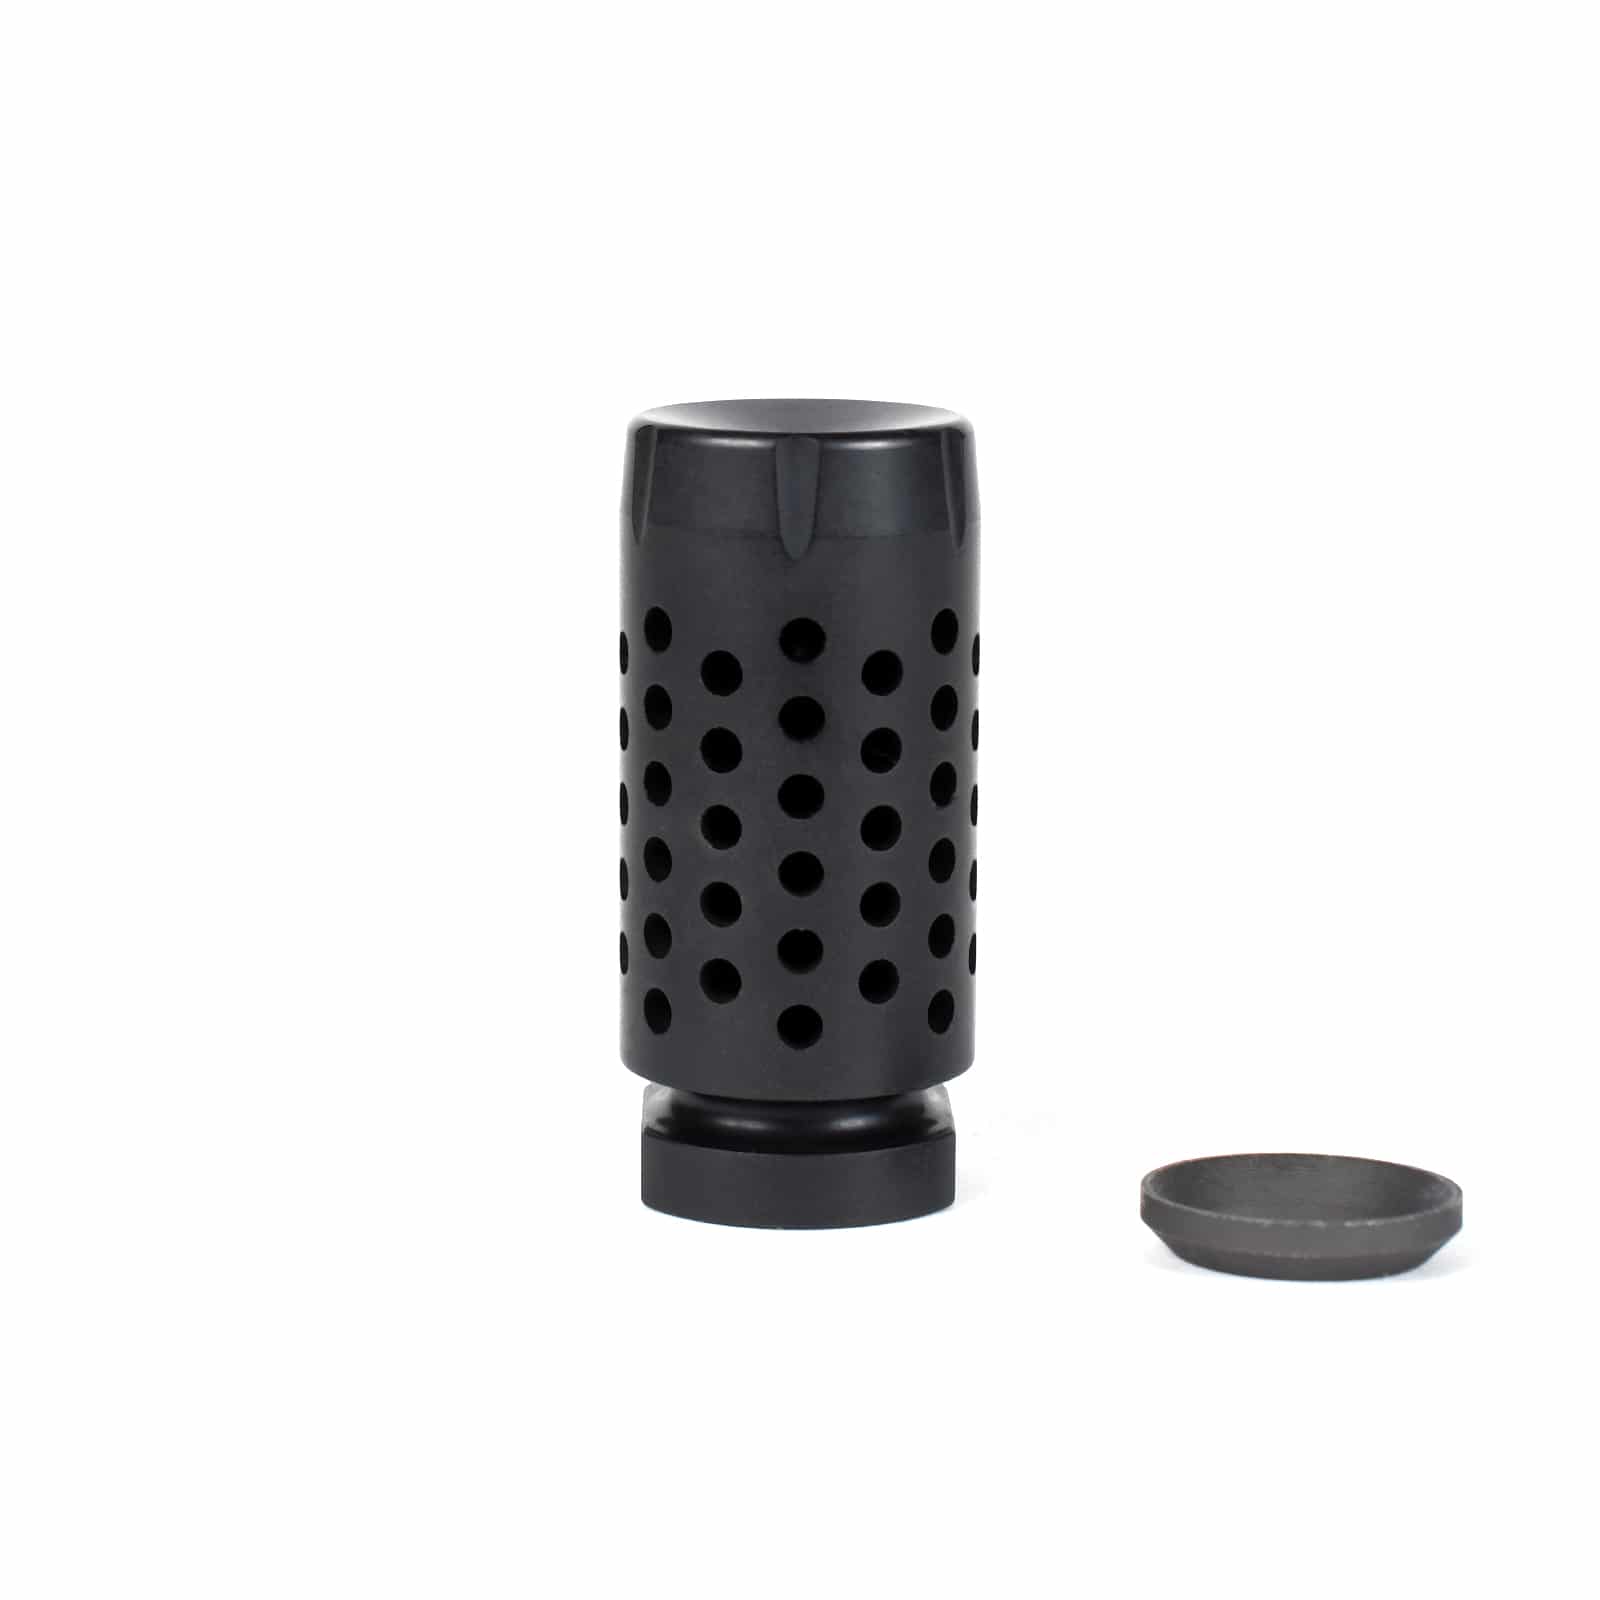 AT3 Tactical AR-15 Compensator with Crush Washer